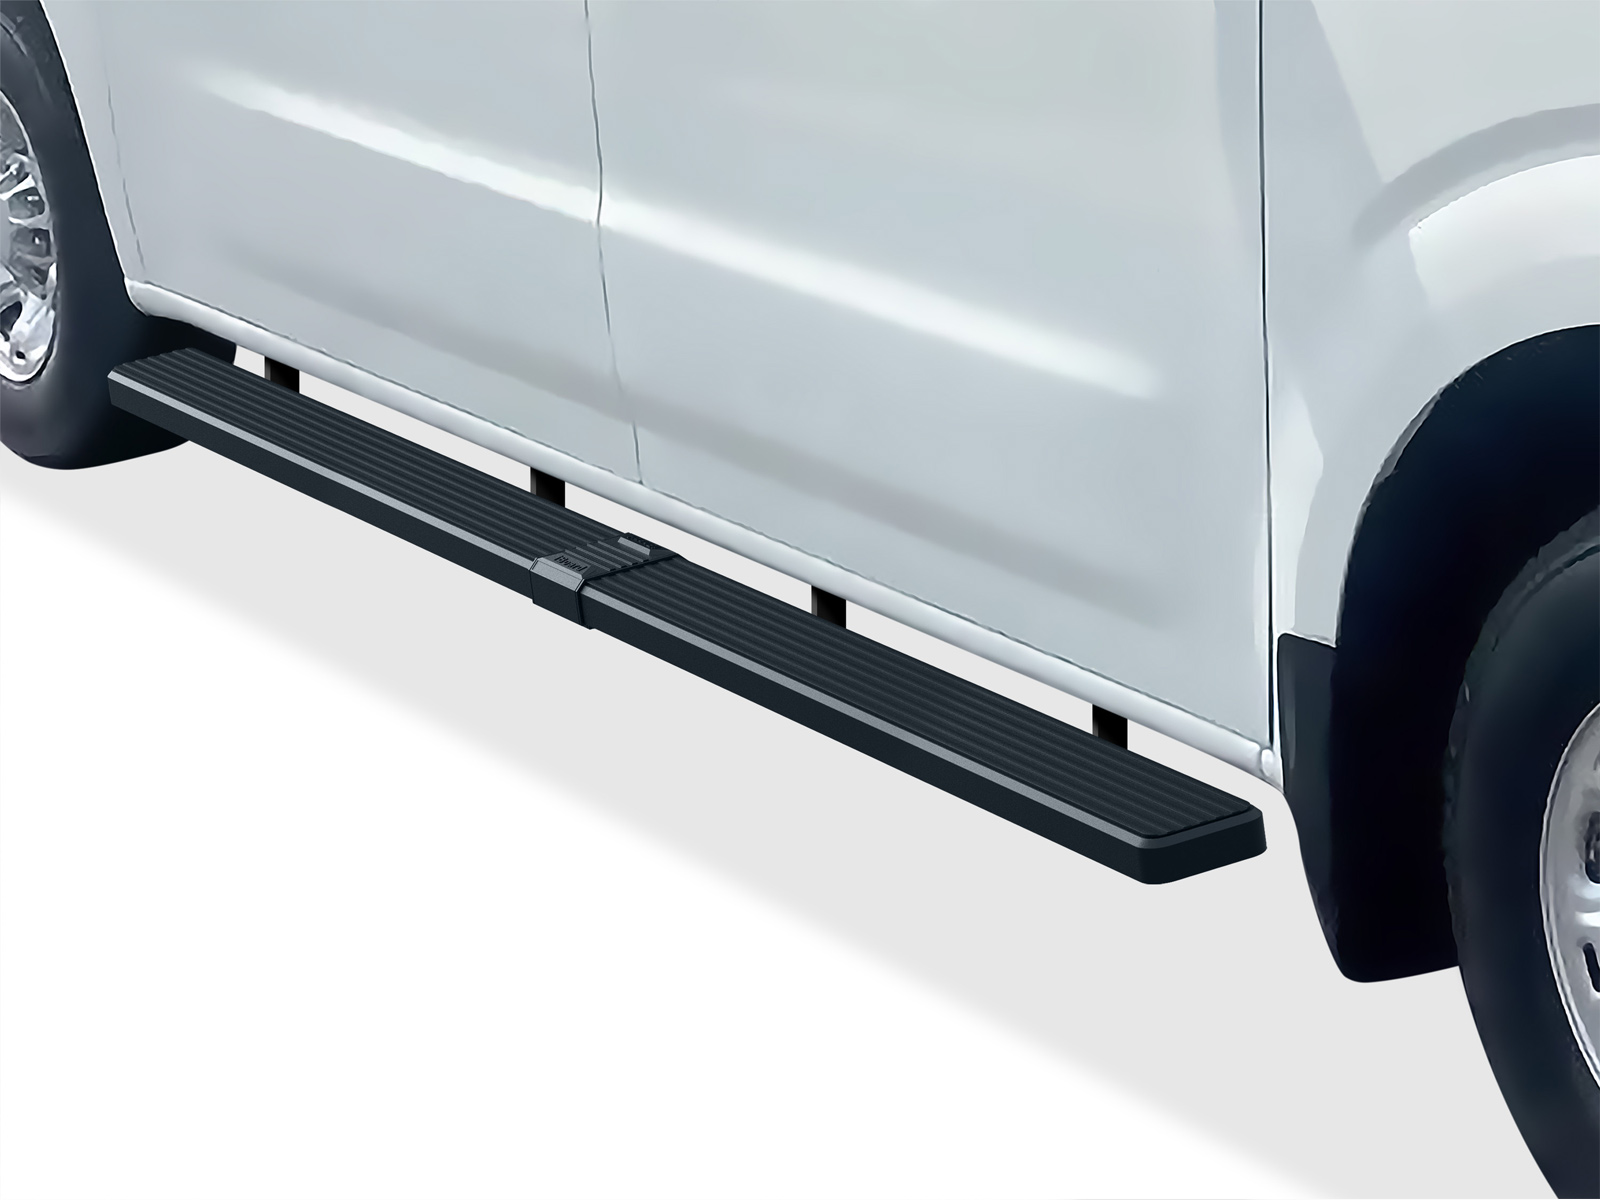 2012-2021 Nissan NV 1500/2500/3500 Van (Full Size) For 3-Door Models Only Both Sides iStep 6 Inch Van Stainless Steel